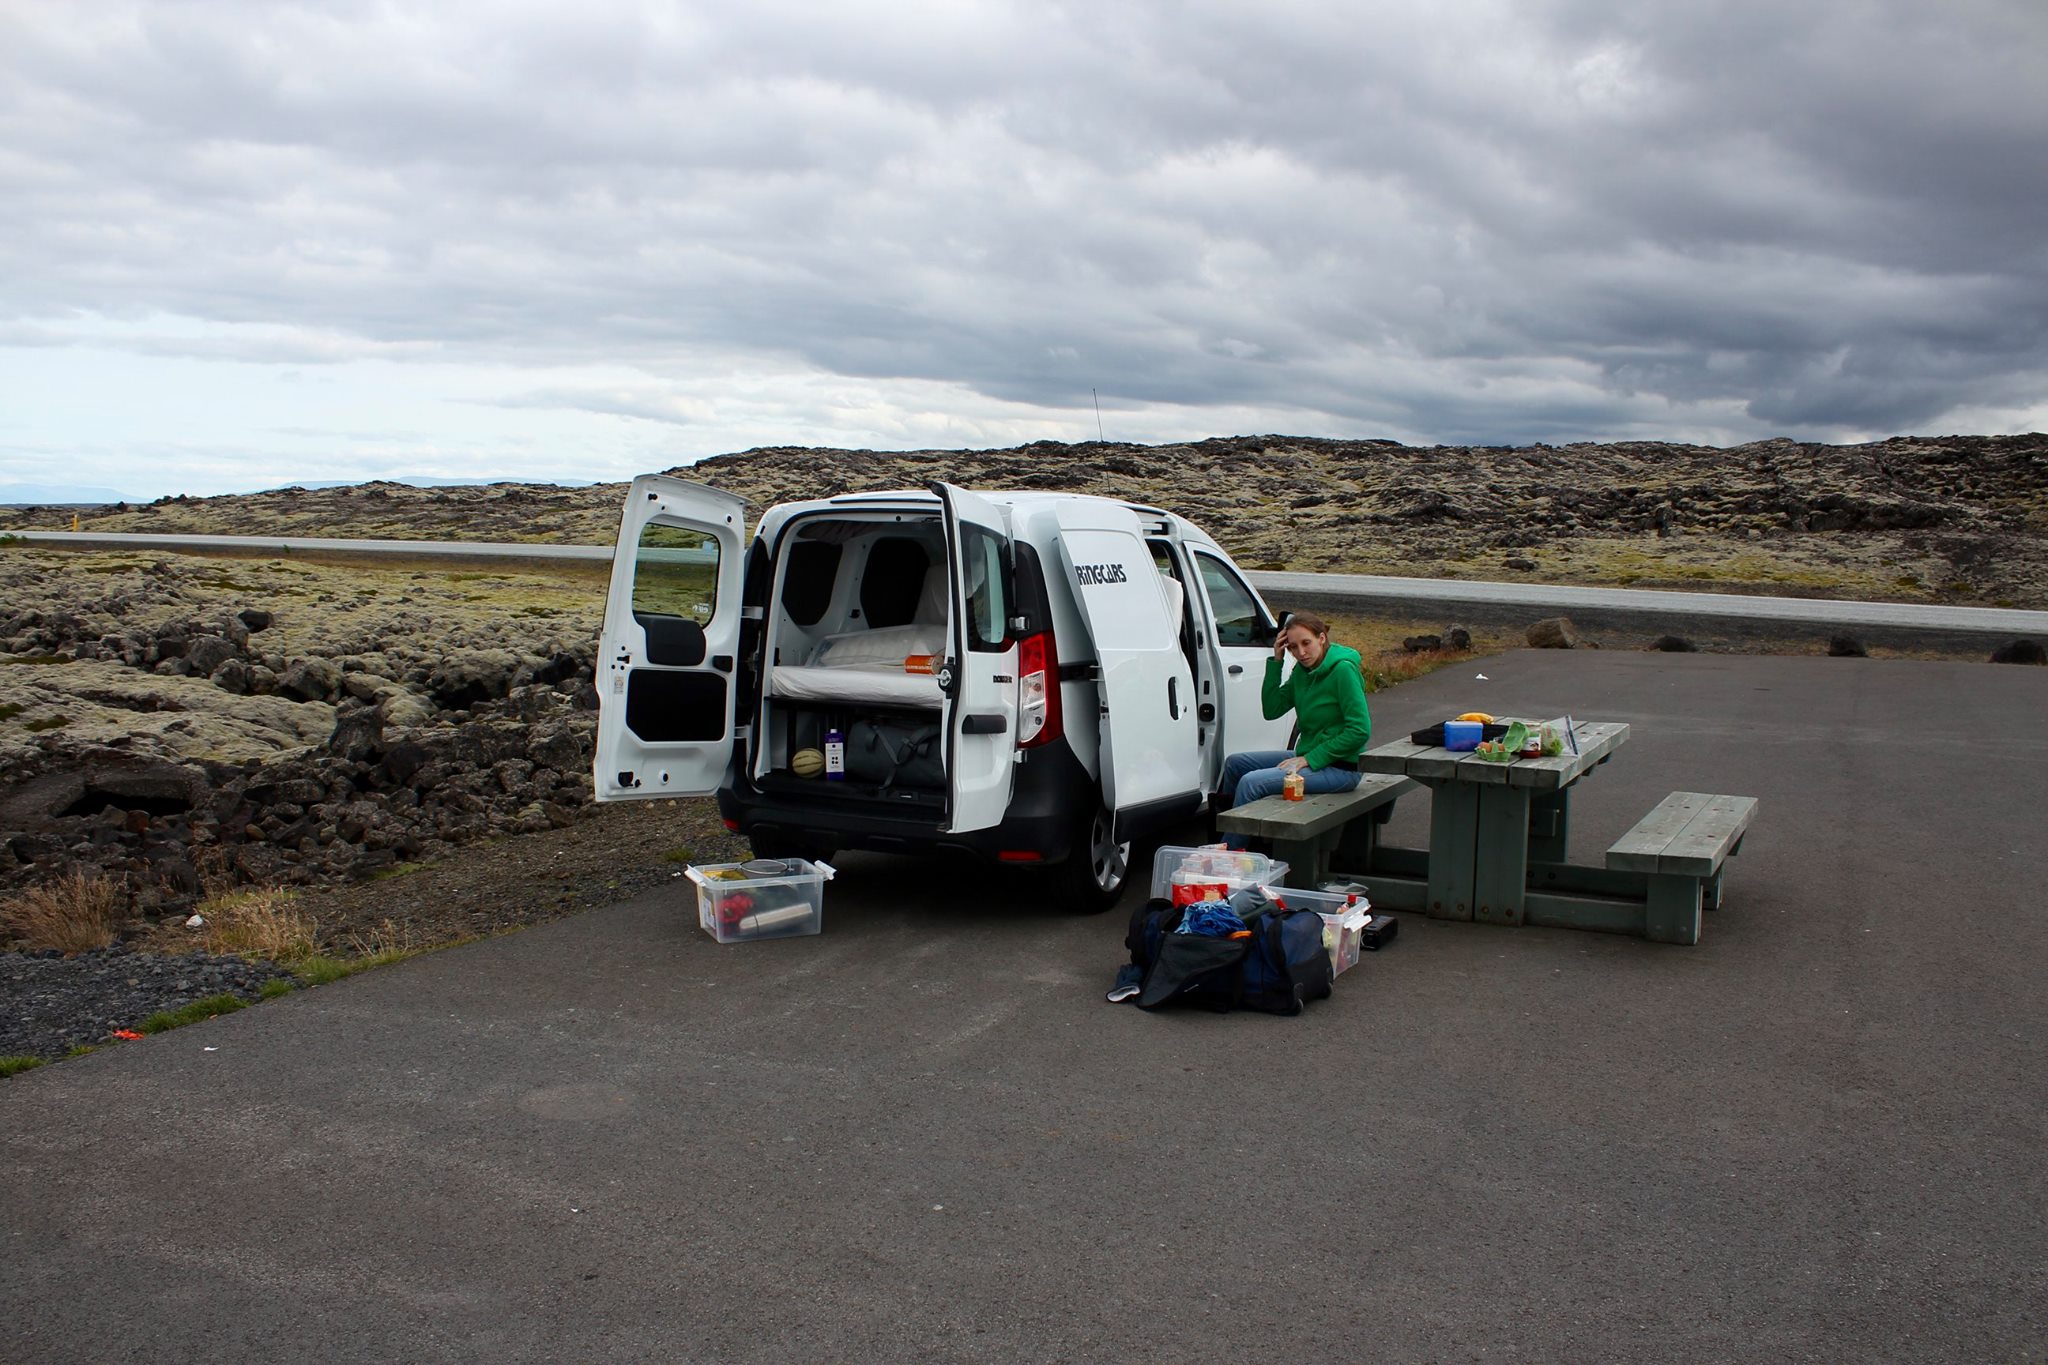 Our rented van in Iceland with bed and kitchen equipment that we drove around Iceland for two weeks to celebrate our honeymoon